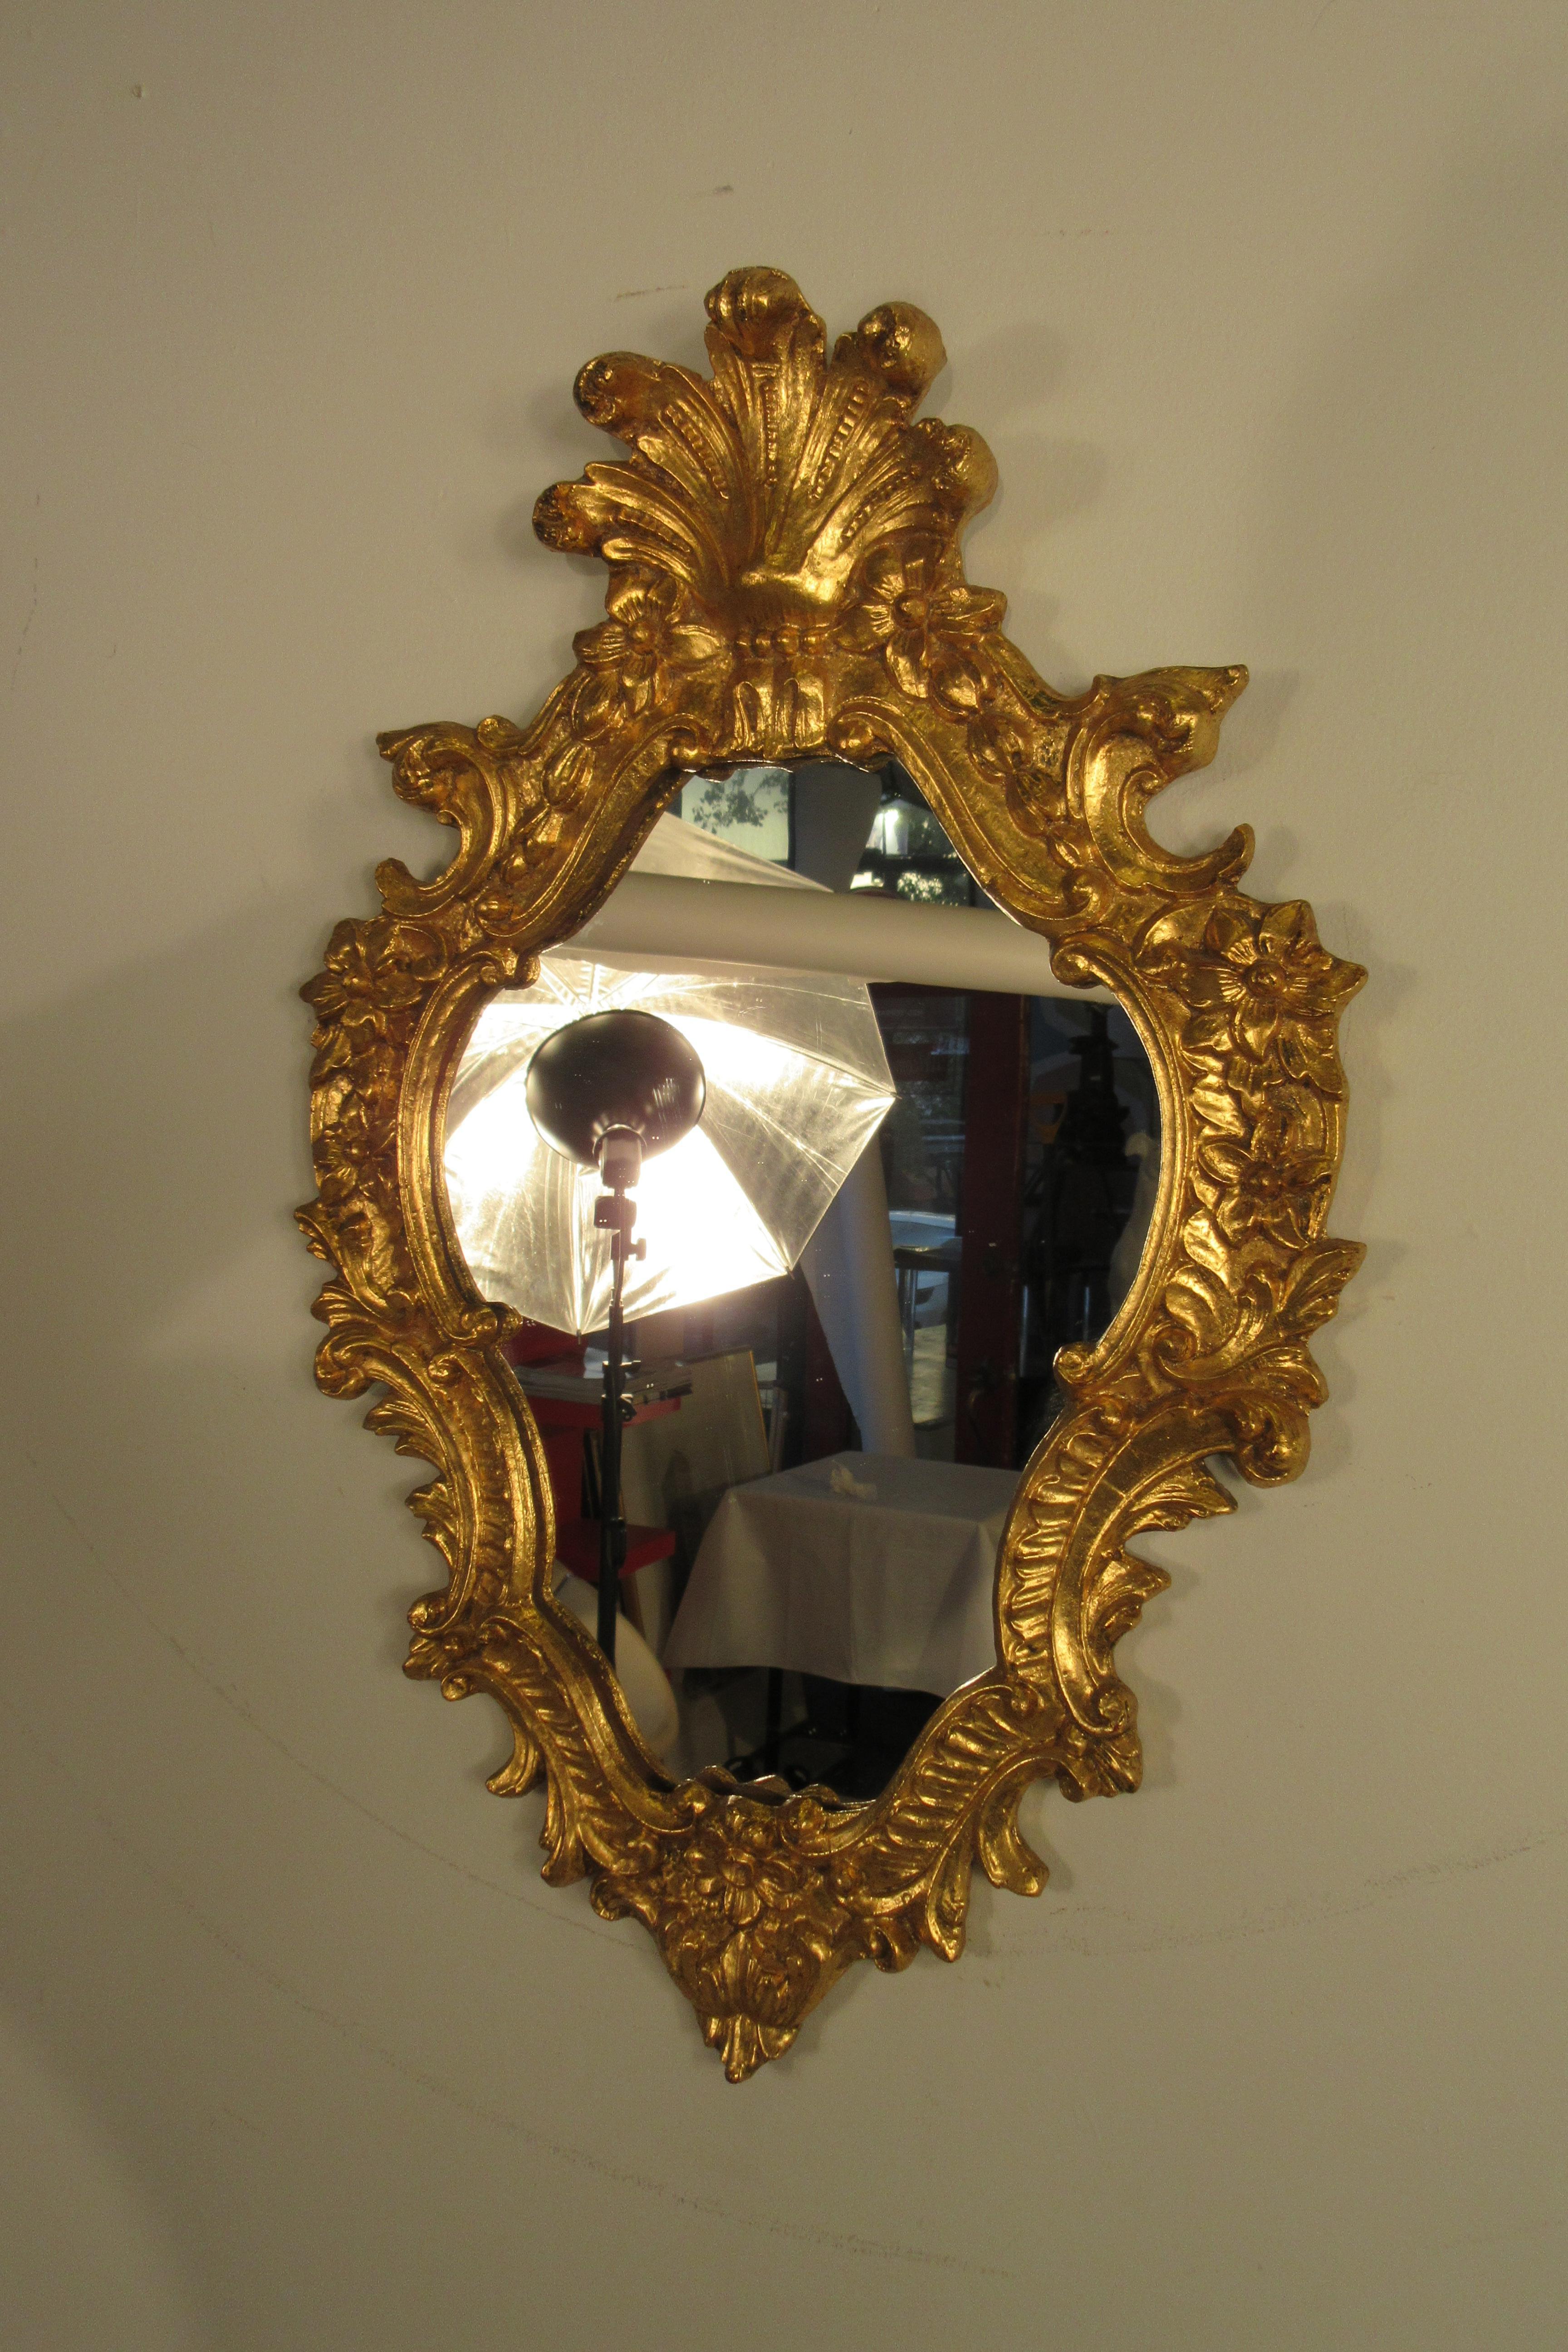 1950s Italian carved wood gilt mirror.
This item can be shipped UPS.